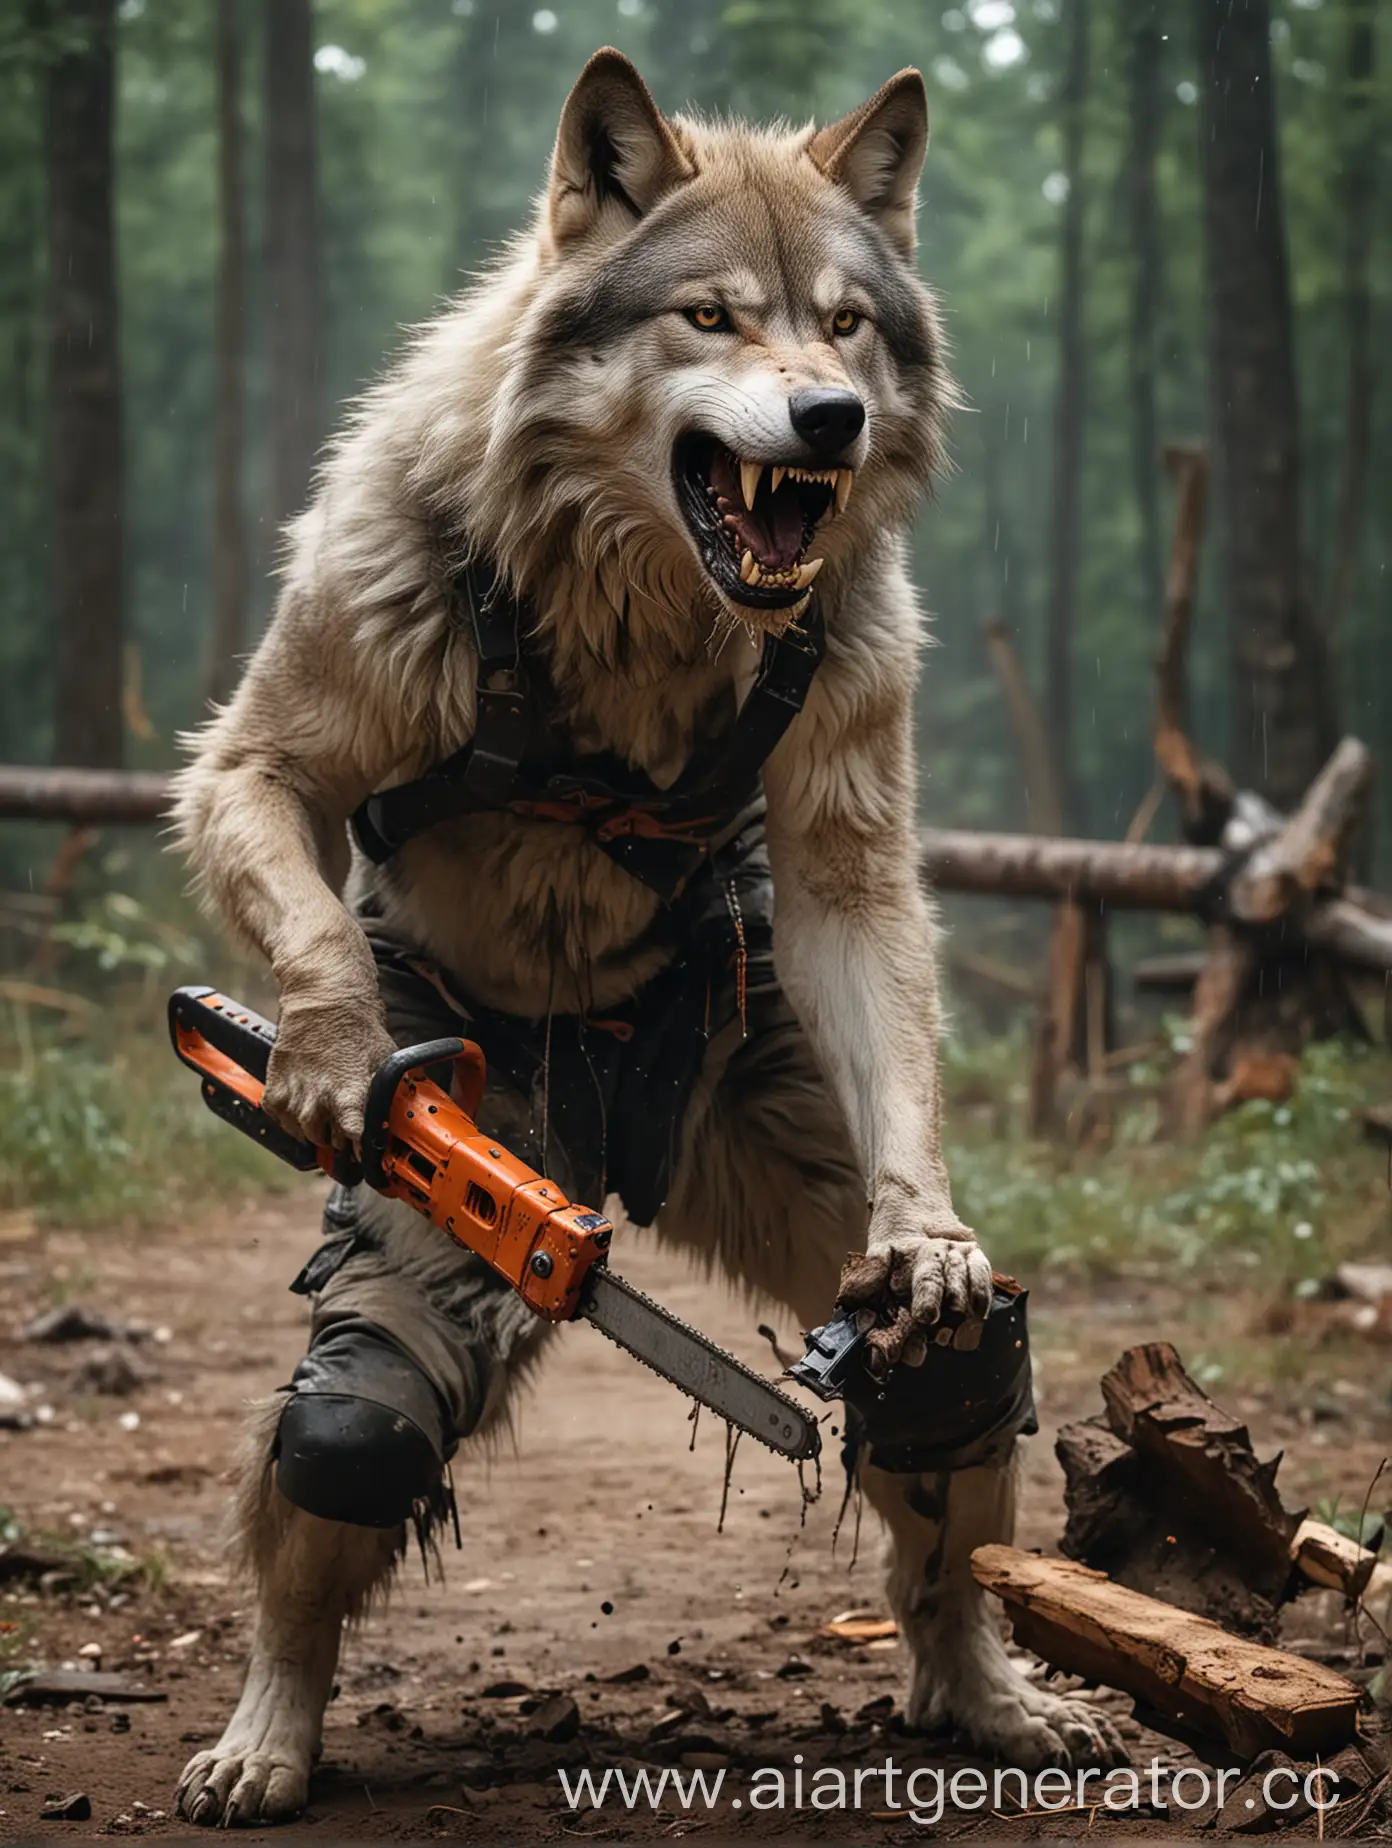 Wolf-with-Chainsaw-Fights-KungFu-Master-in-Intense-Battle